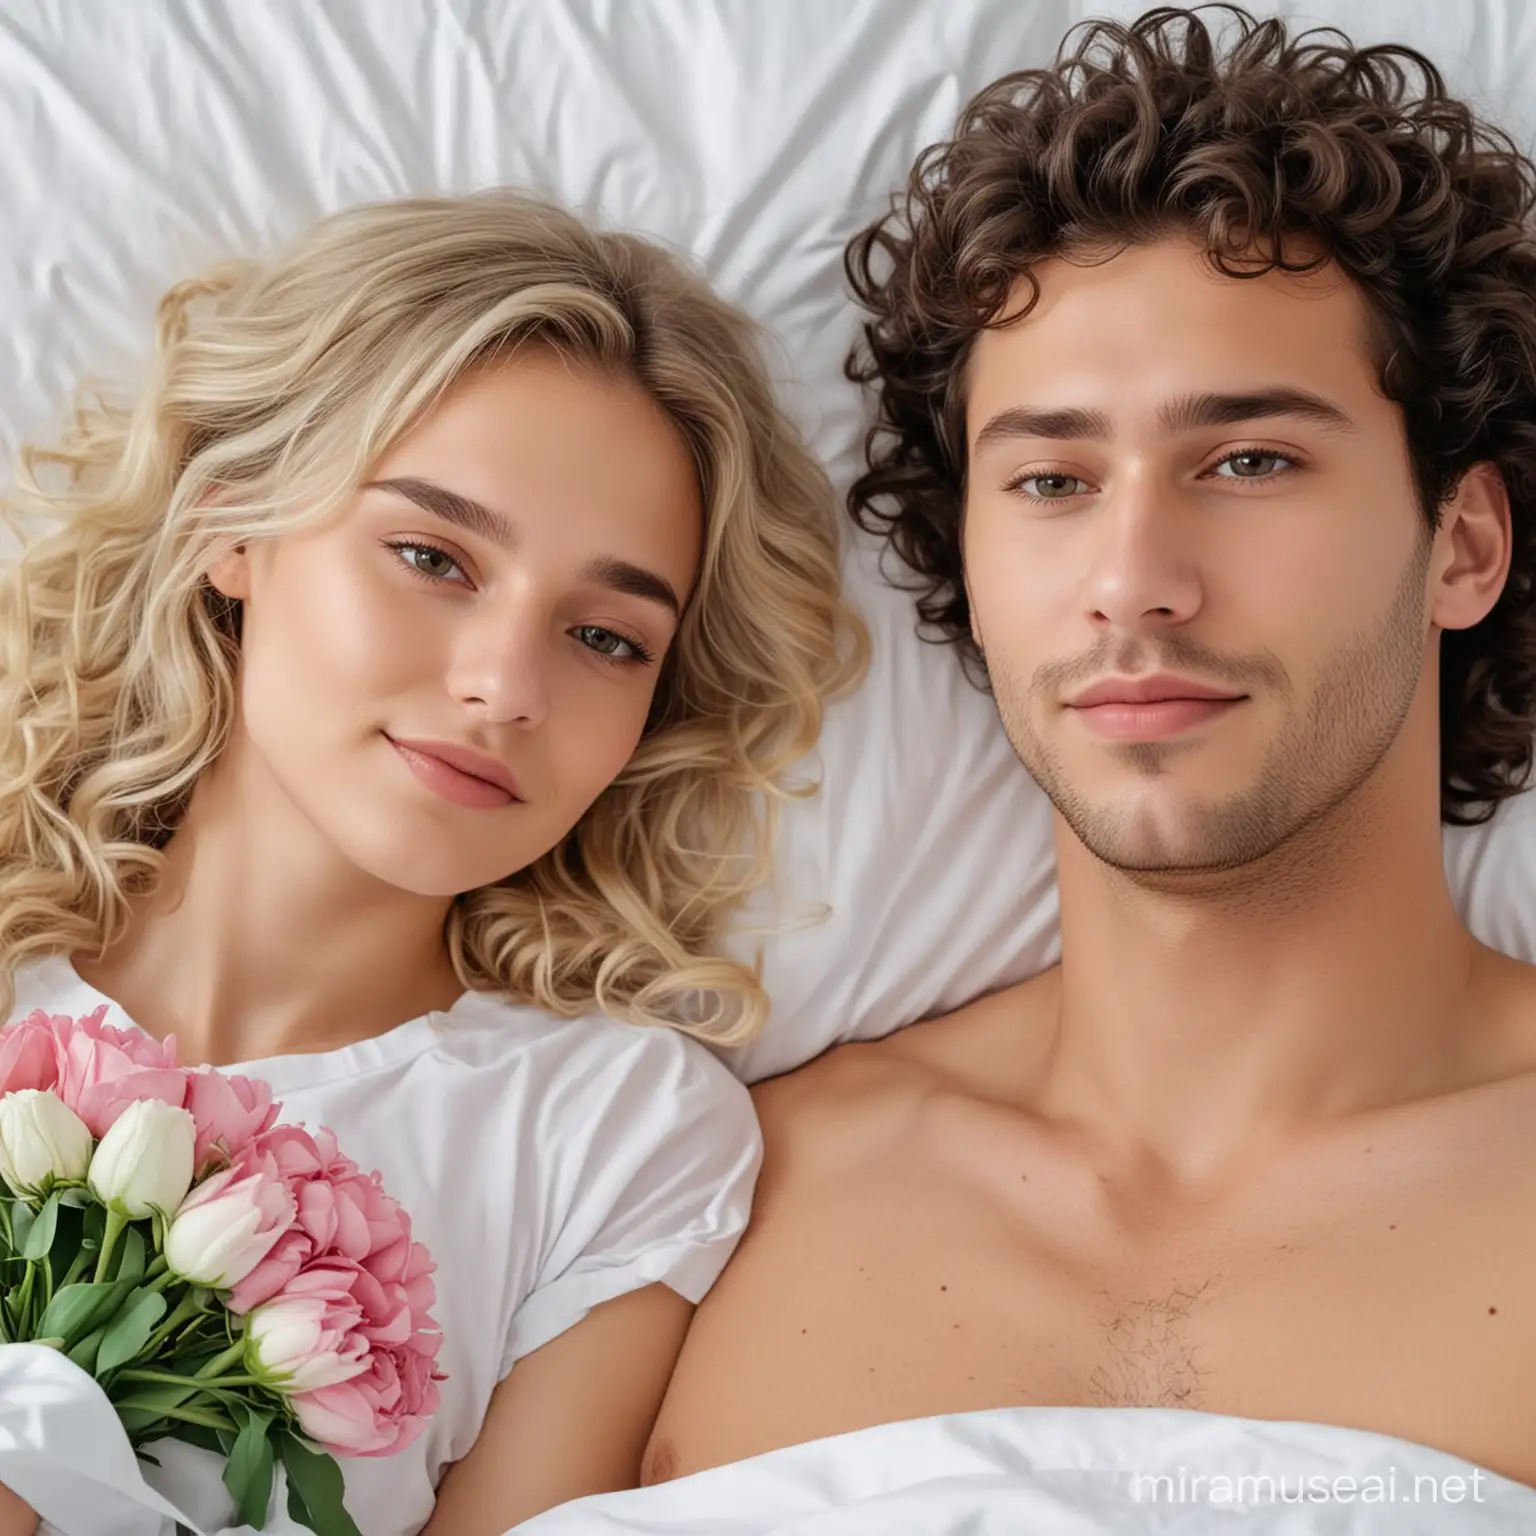 a beautiful girl with blonde hair is lying on the bed in the ward and a guy with dark curly hair came to her with flowers, the hospital